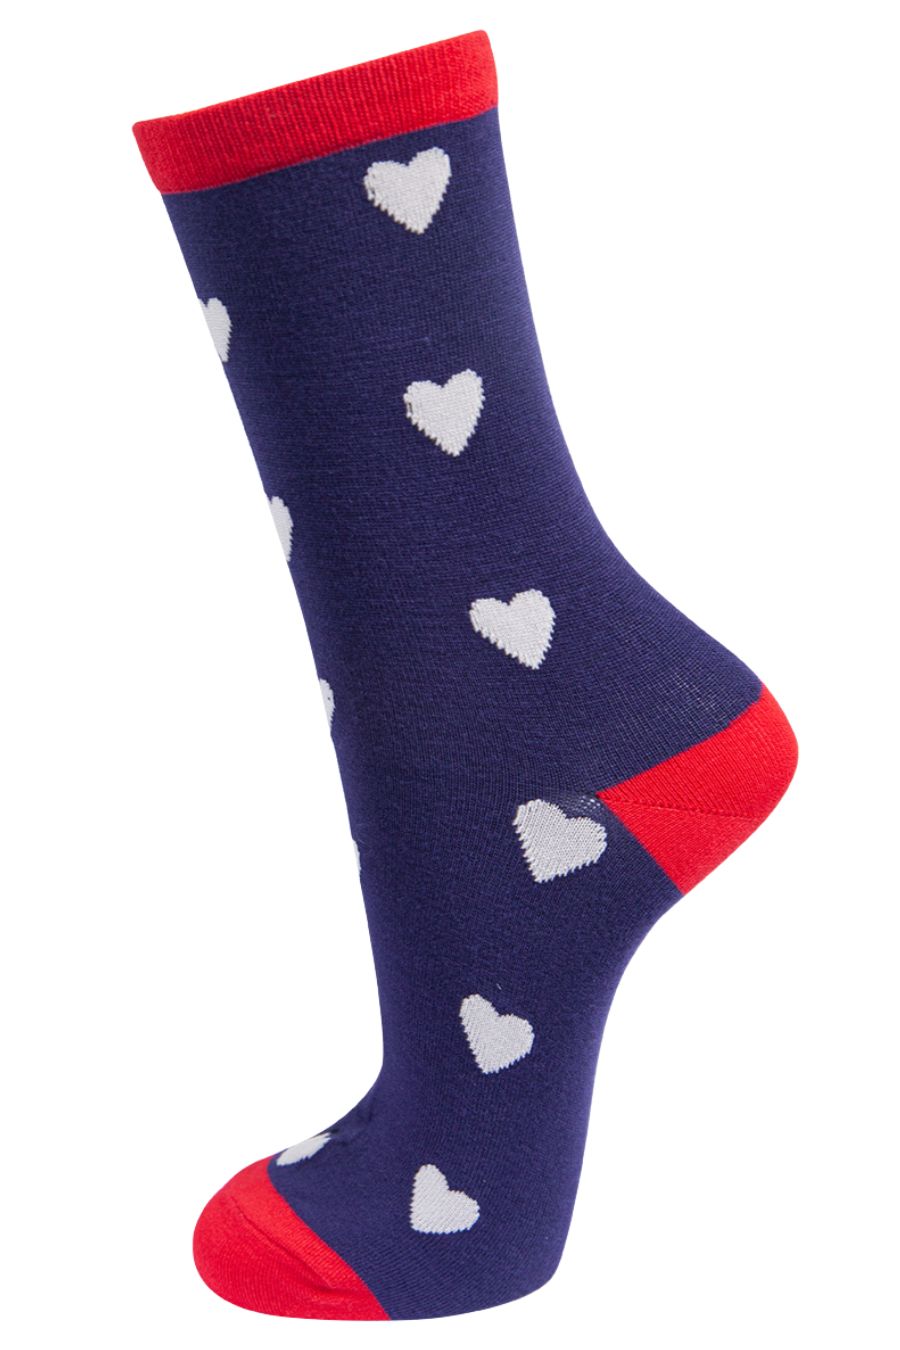 navy blue ankle socks, red toe, heel, trim and white love hearts all over 